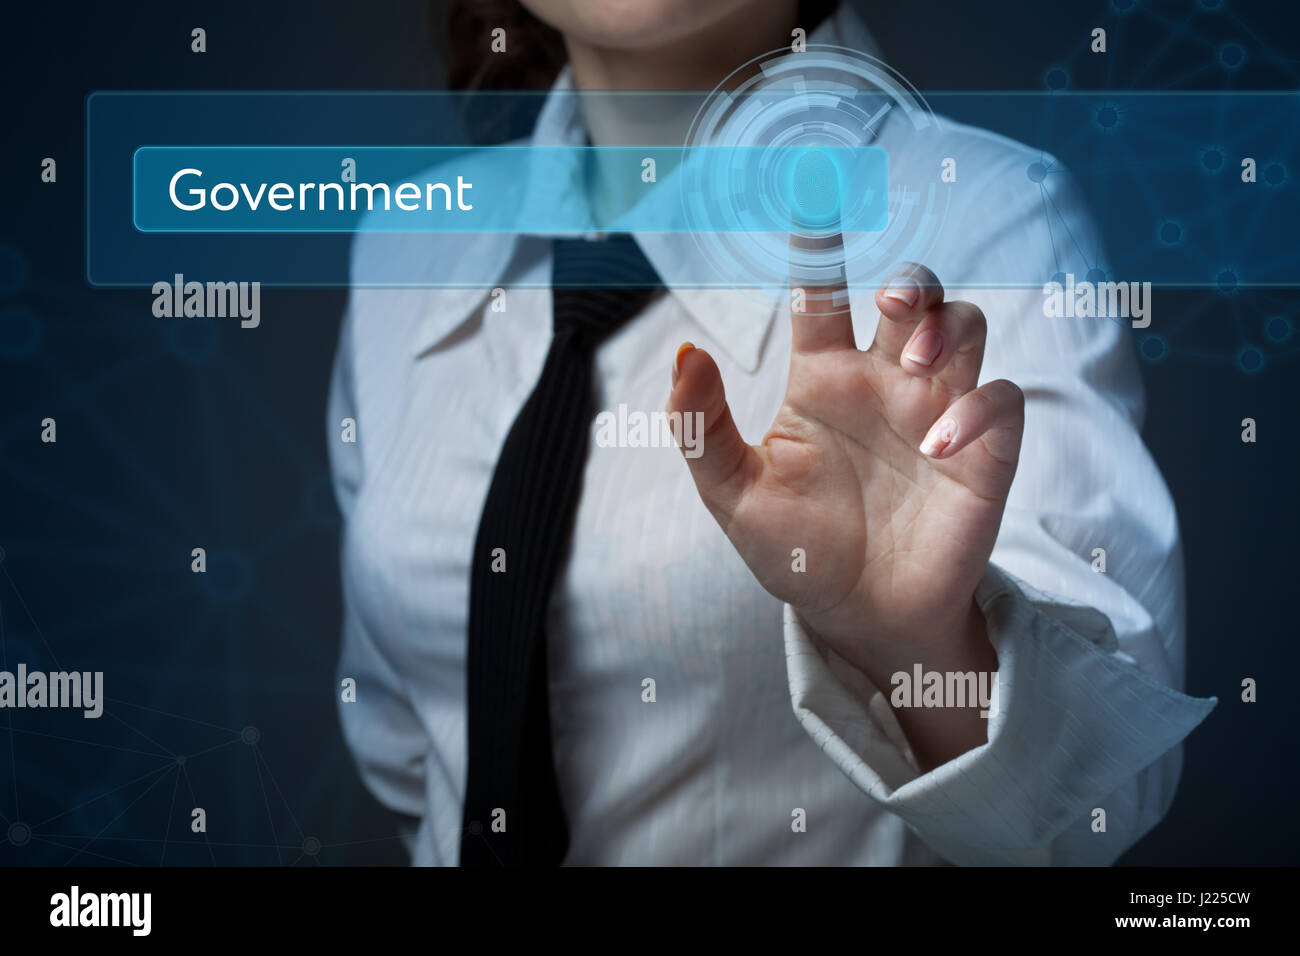 Business, technology, internet and networking concept. Business woman presses a button on the virtual screen: Government Stock Photo